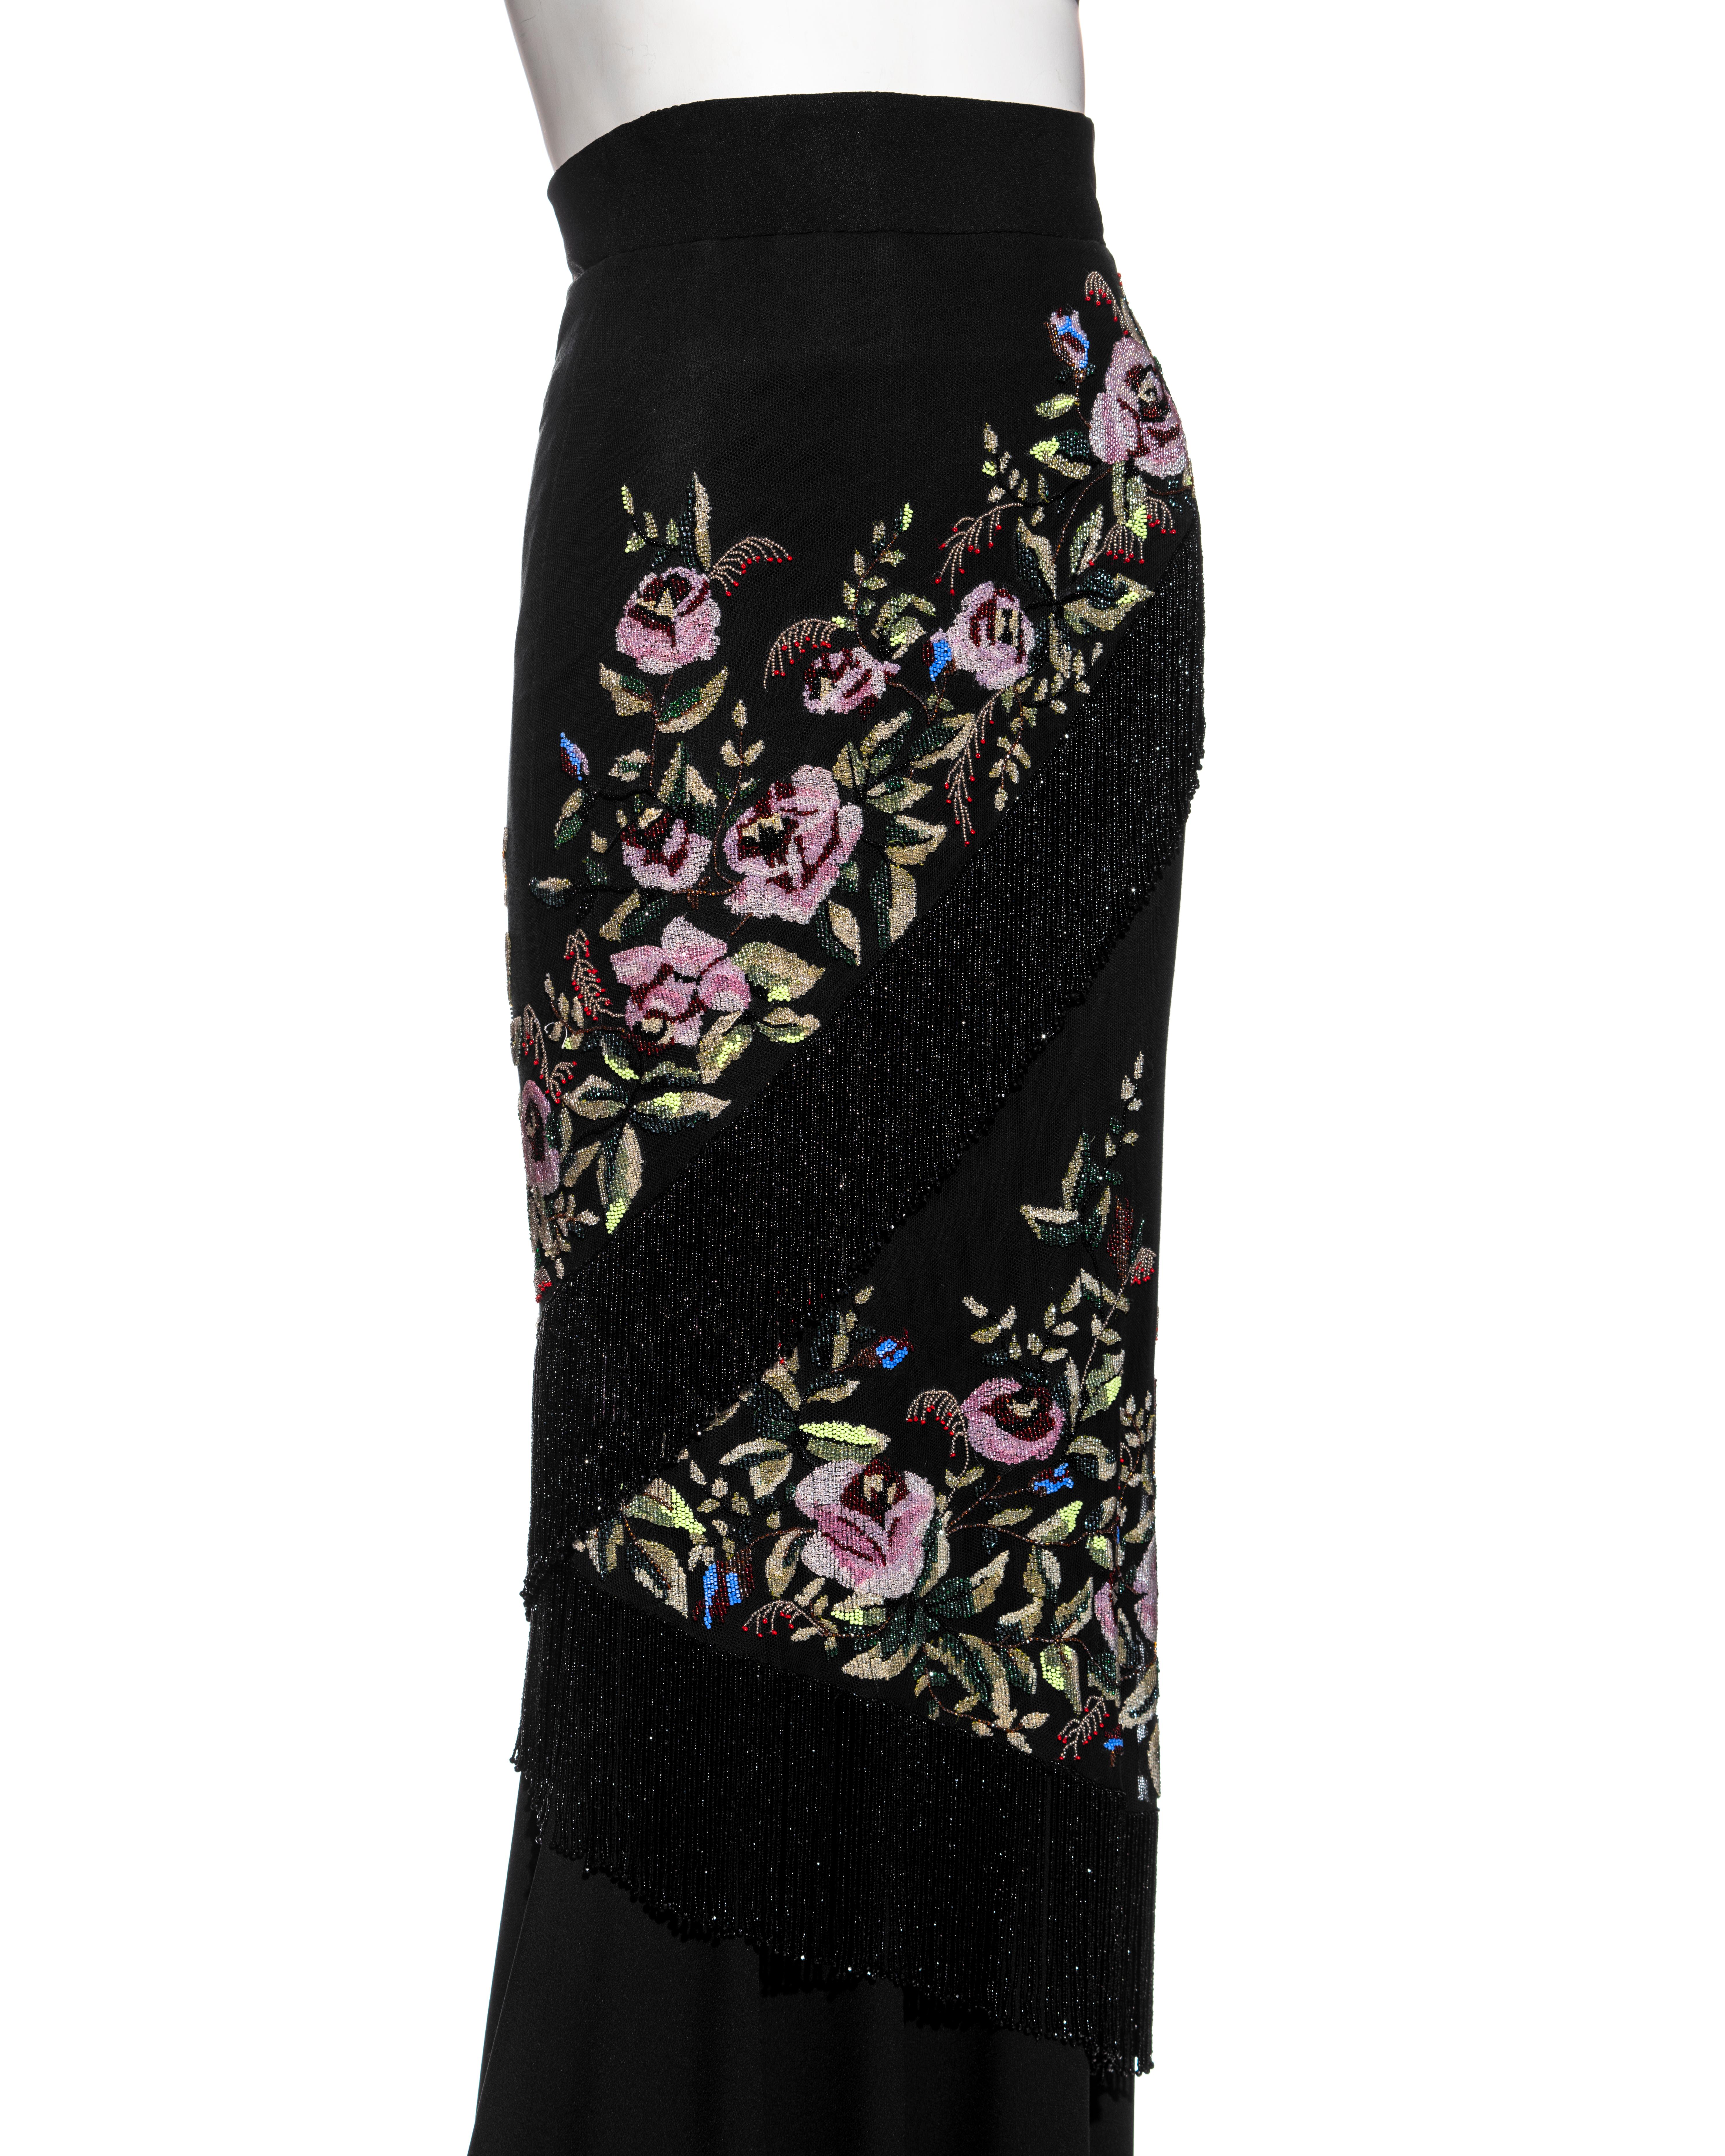 Givenchy Haute Couture by Alexander McQueen beaded evening skirt, fw 1998 For Sale 2